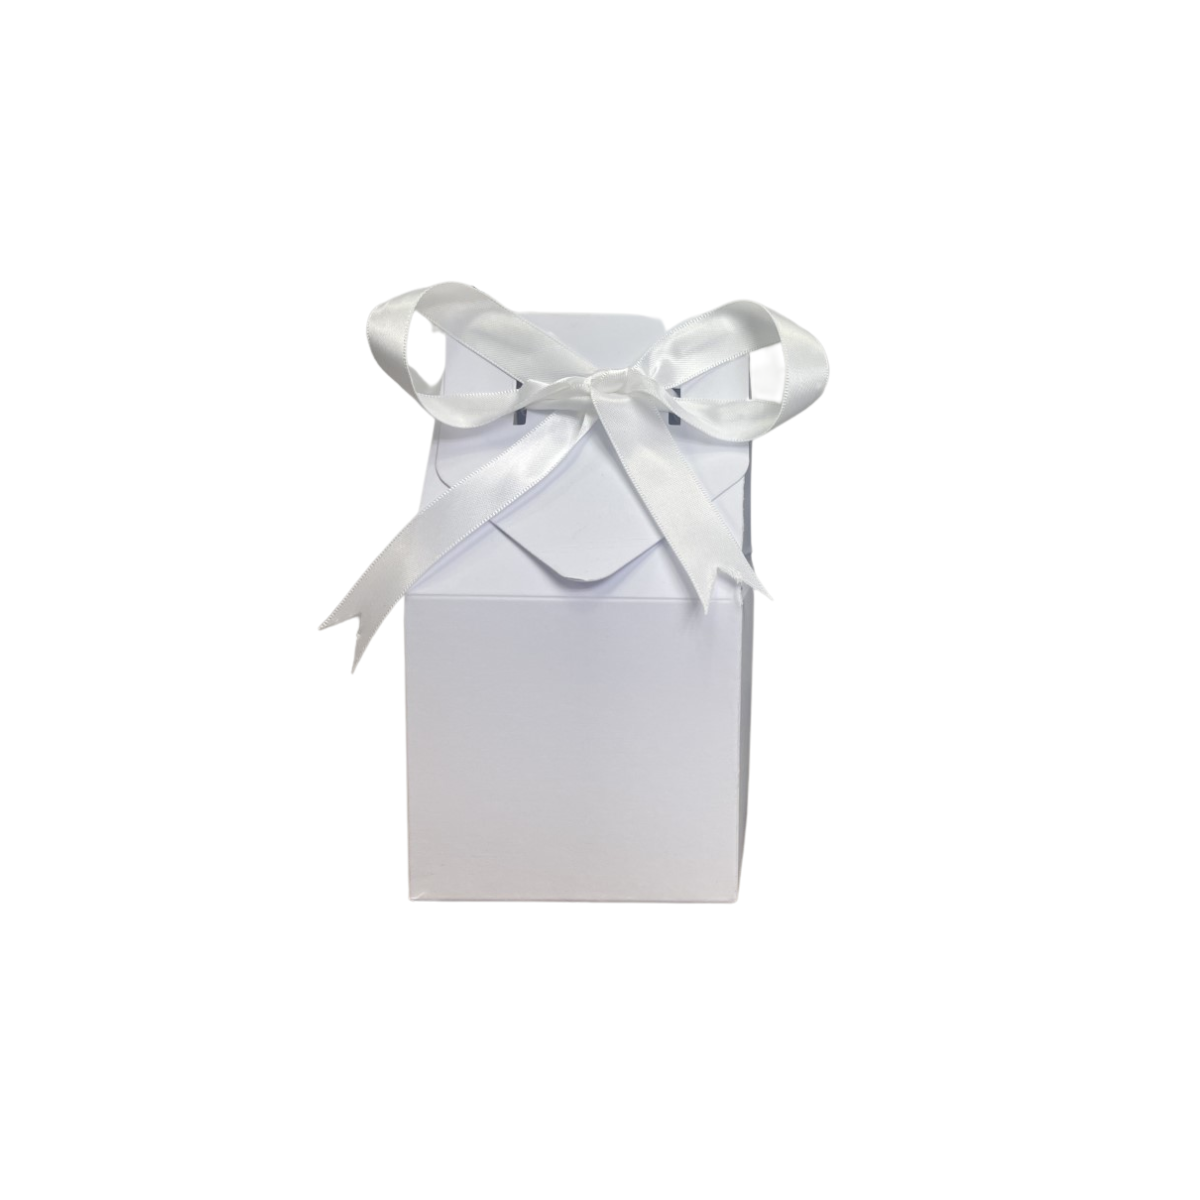 small Deluxe White Gift Box